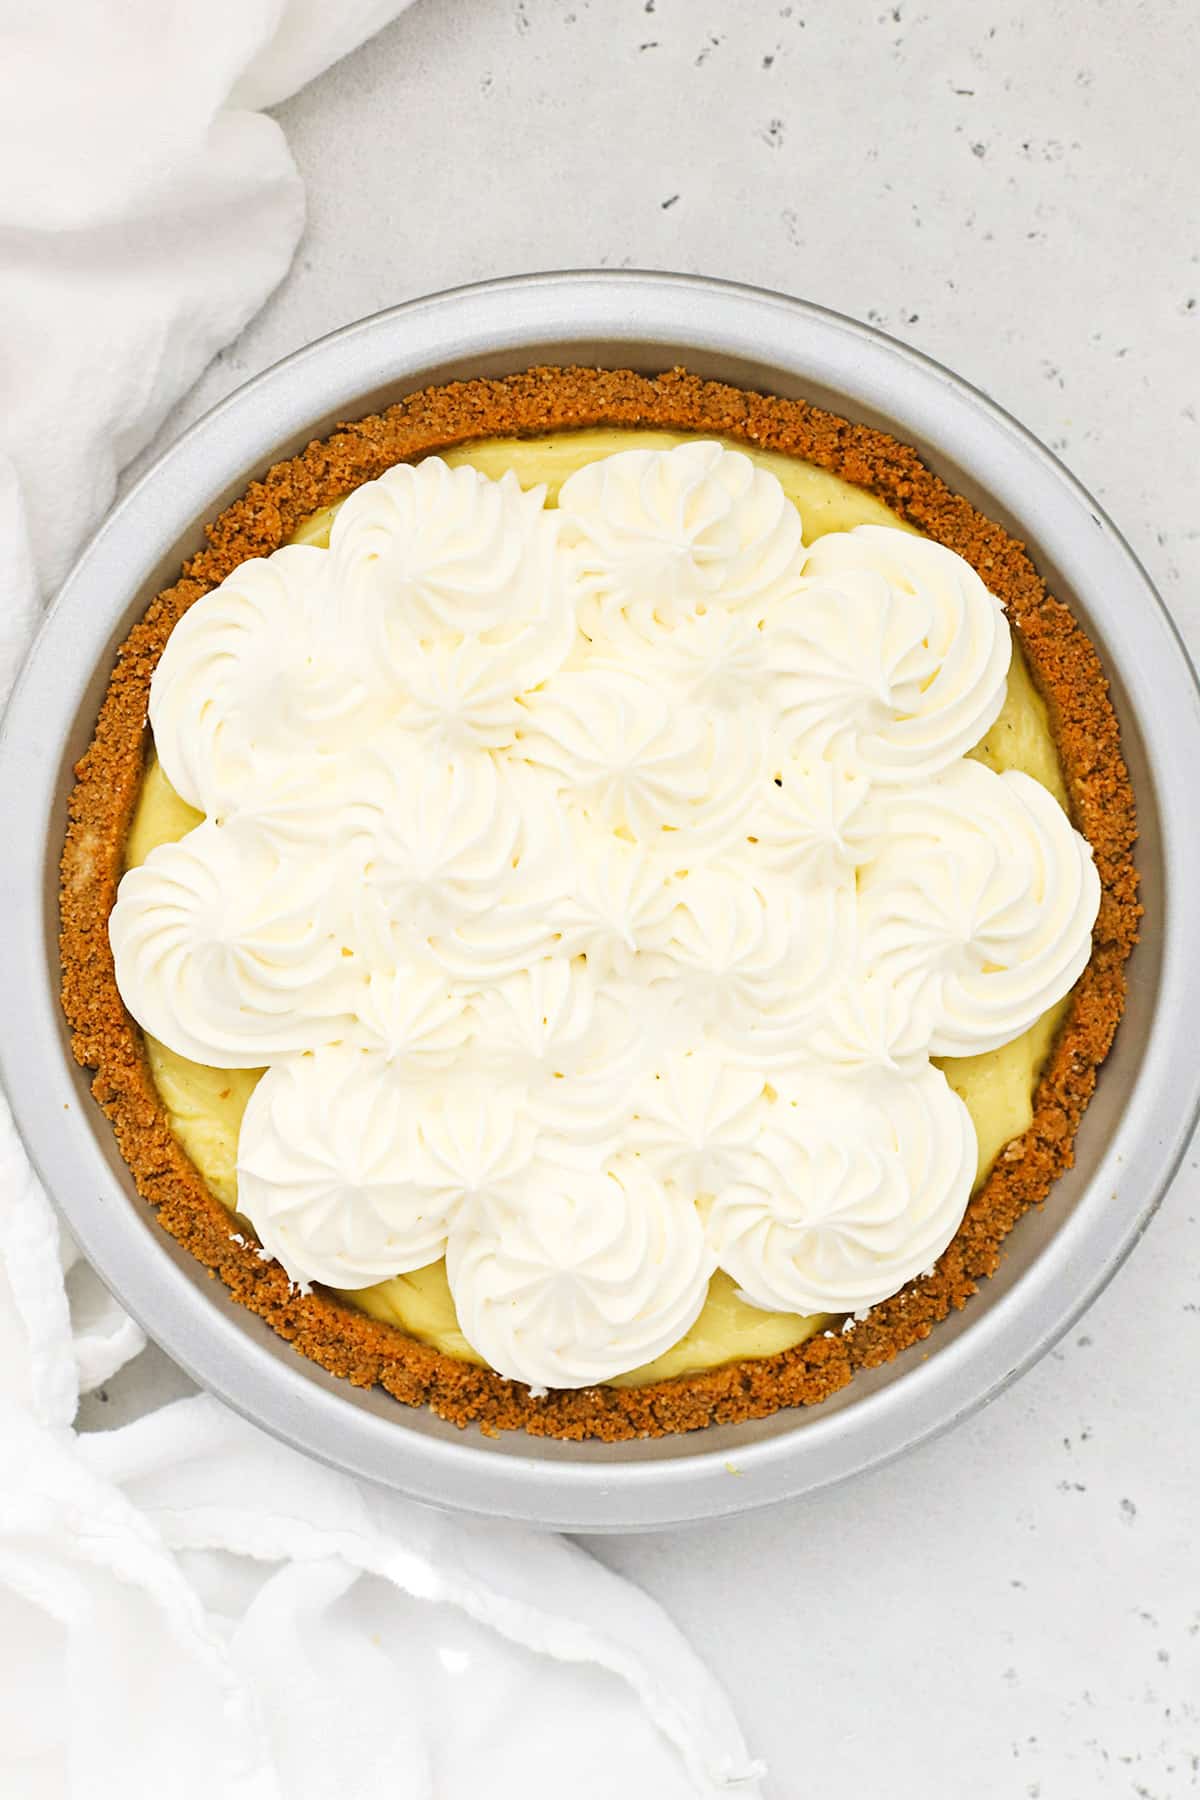 Overhead view of a gluten-free banana cream pie topped with swirls of whipped cream